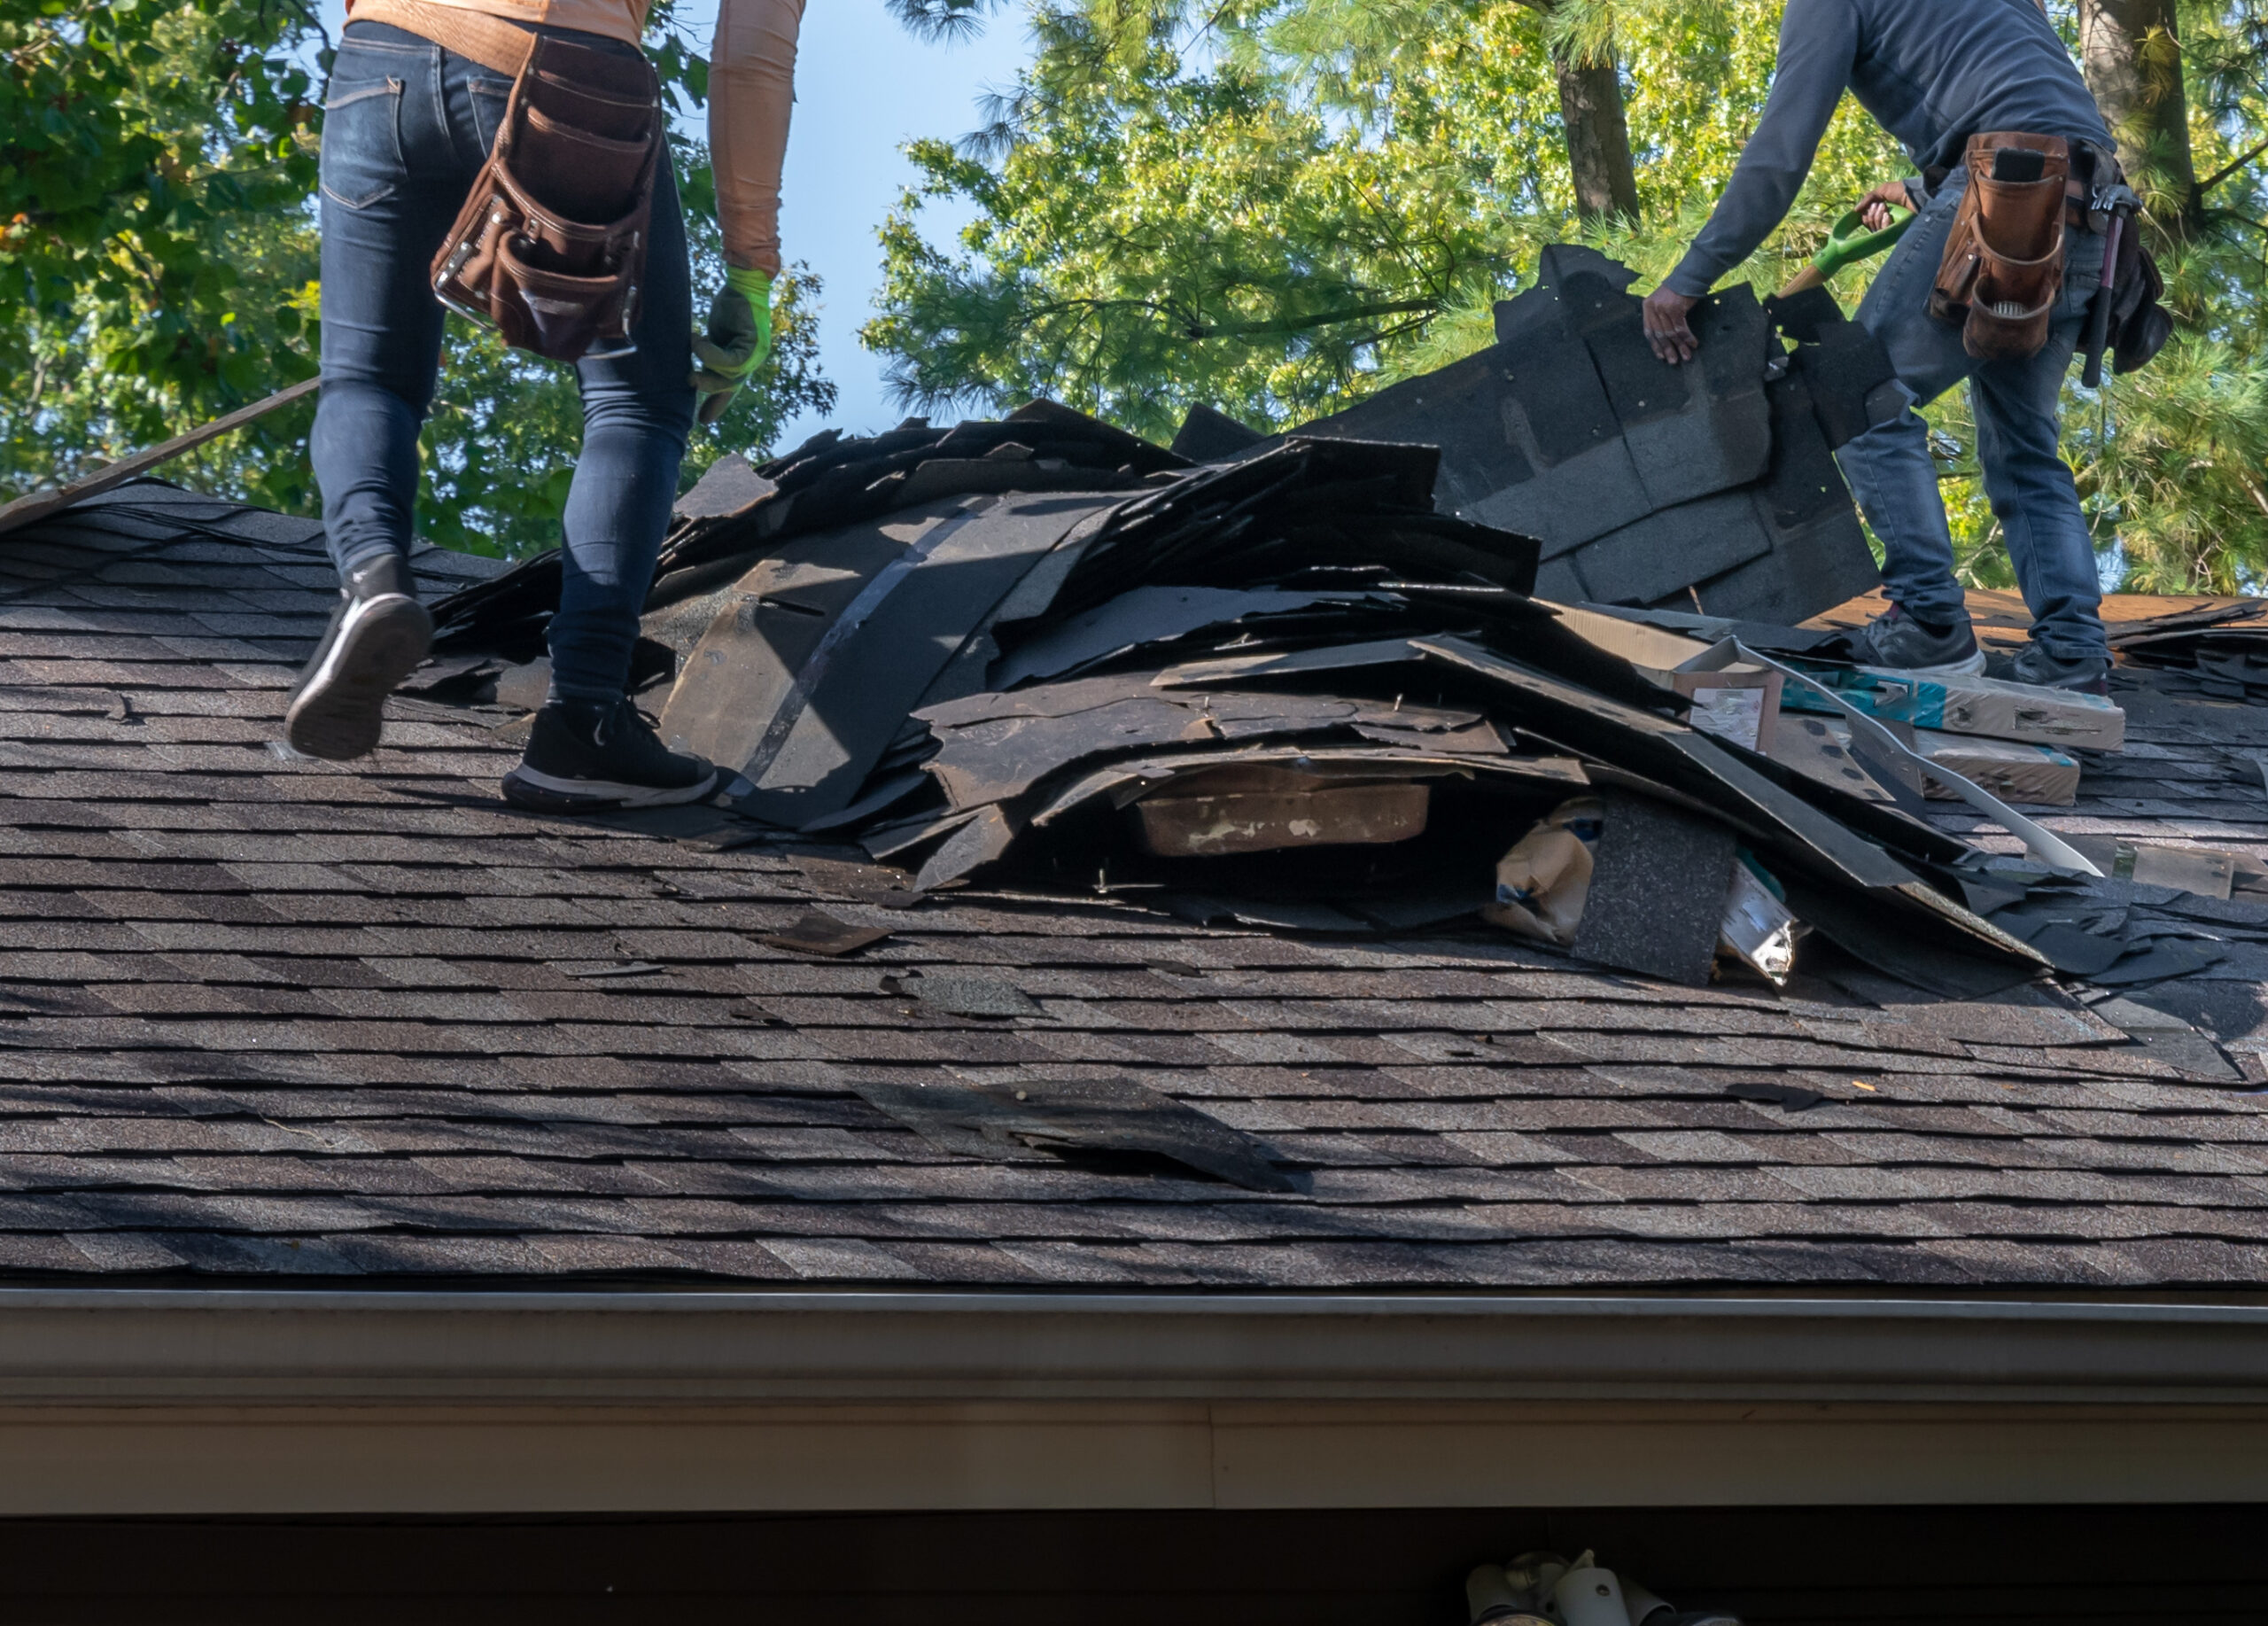 Roofing materials being torn off the roof.